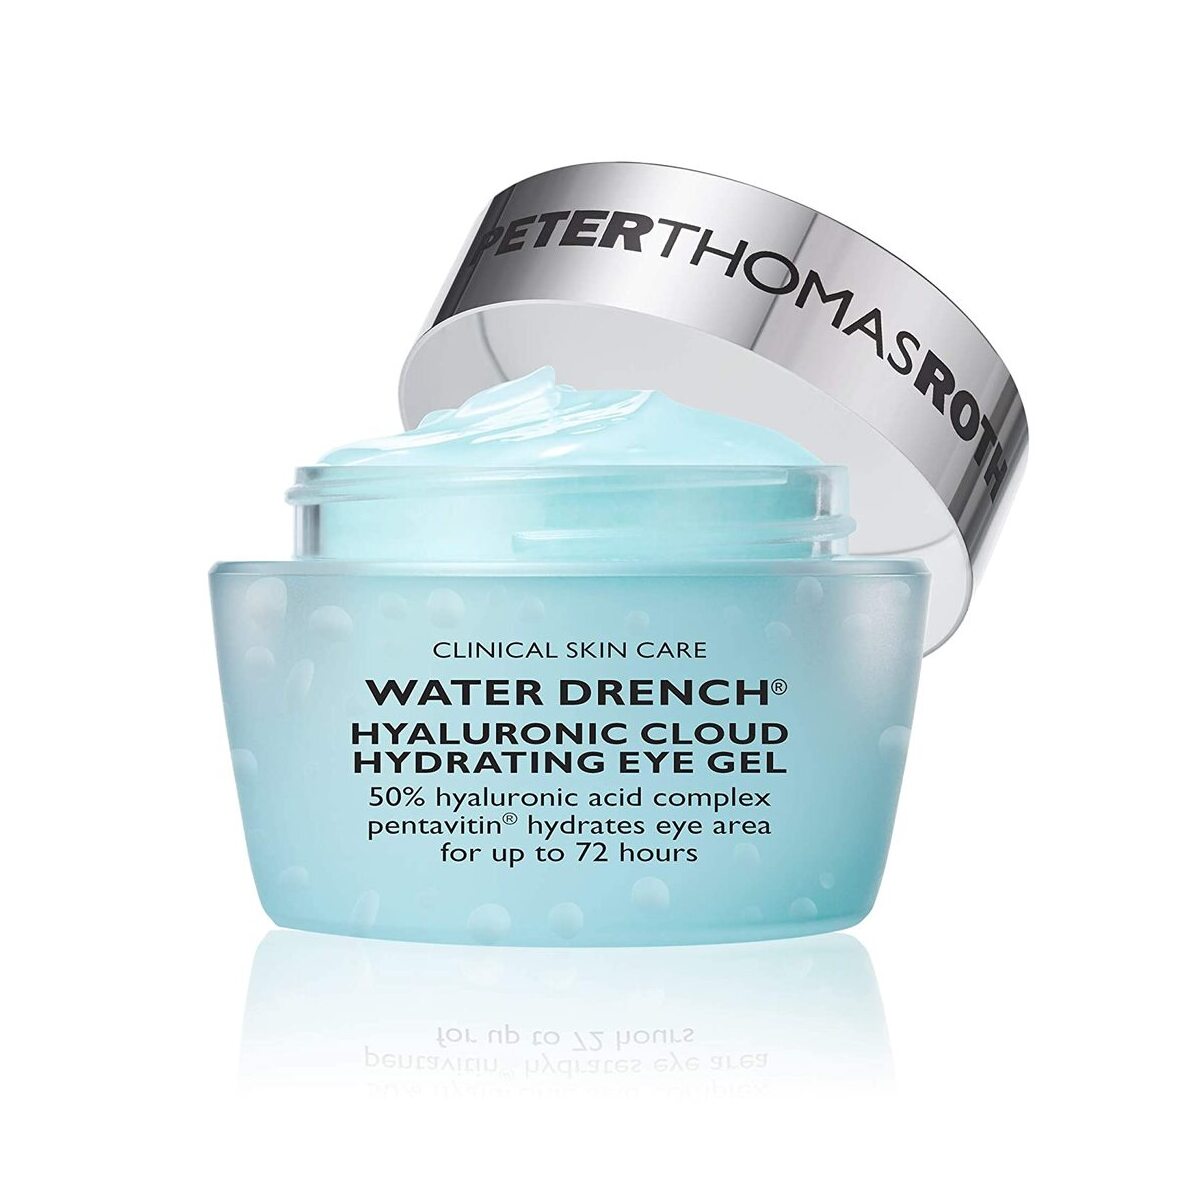 Peter Thomas Roth Water Drench Hyaluronic Cloud Hydrating Eye Gel on white background 